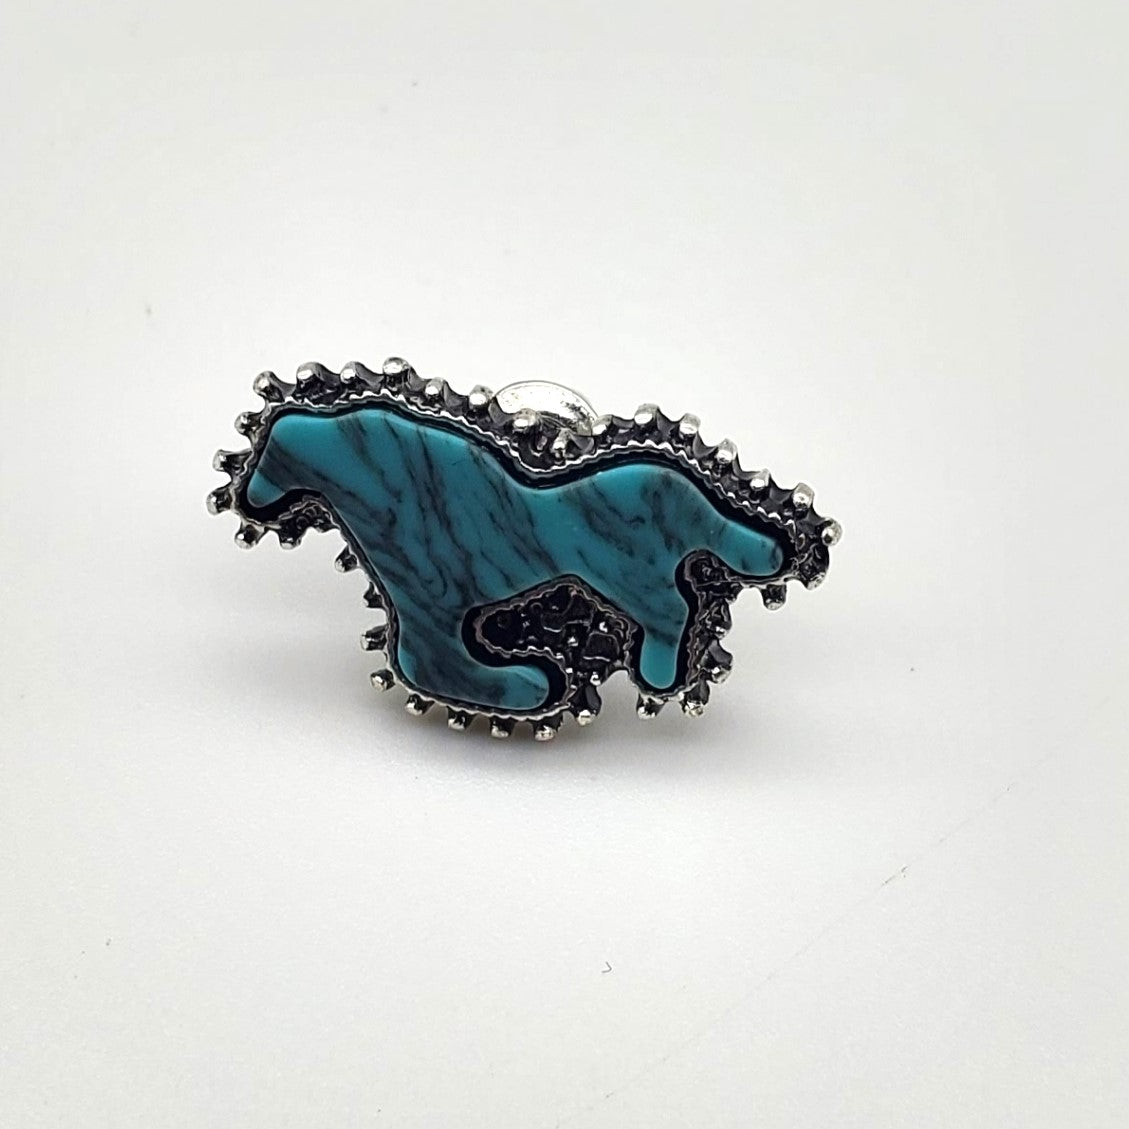 Turquoise Horse Pin